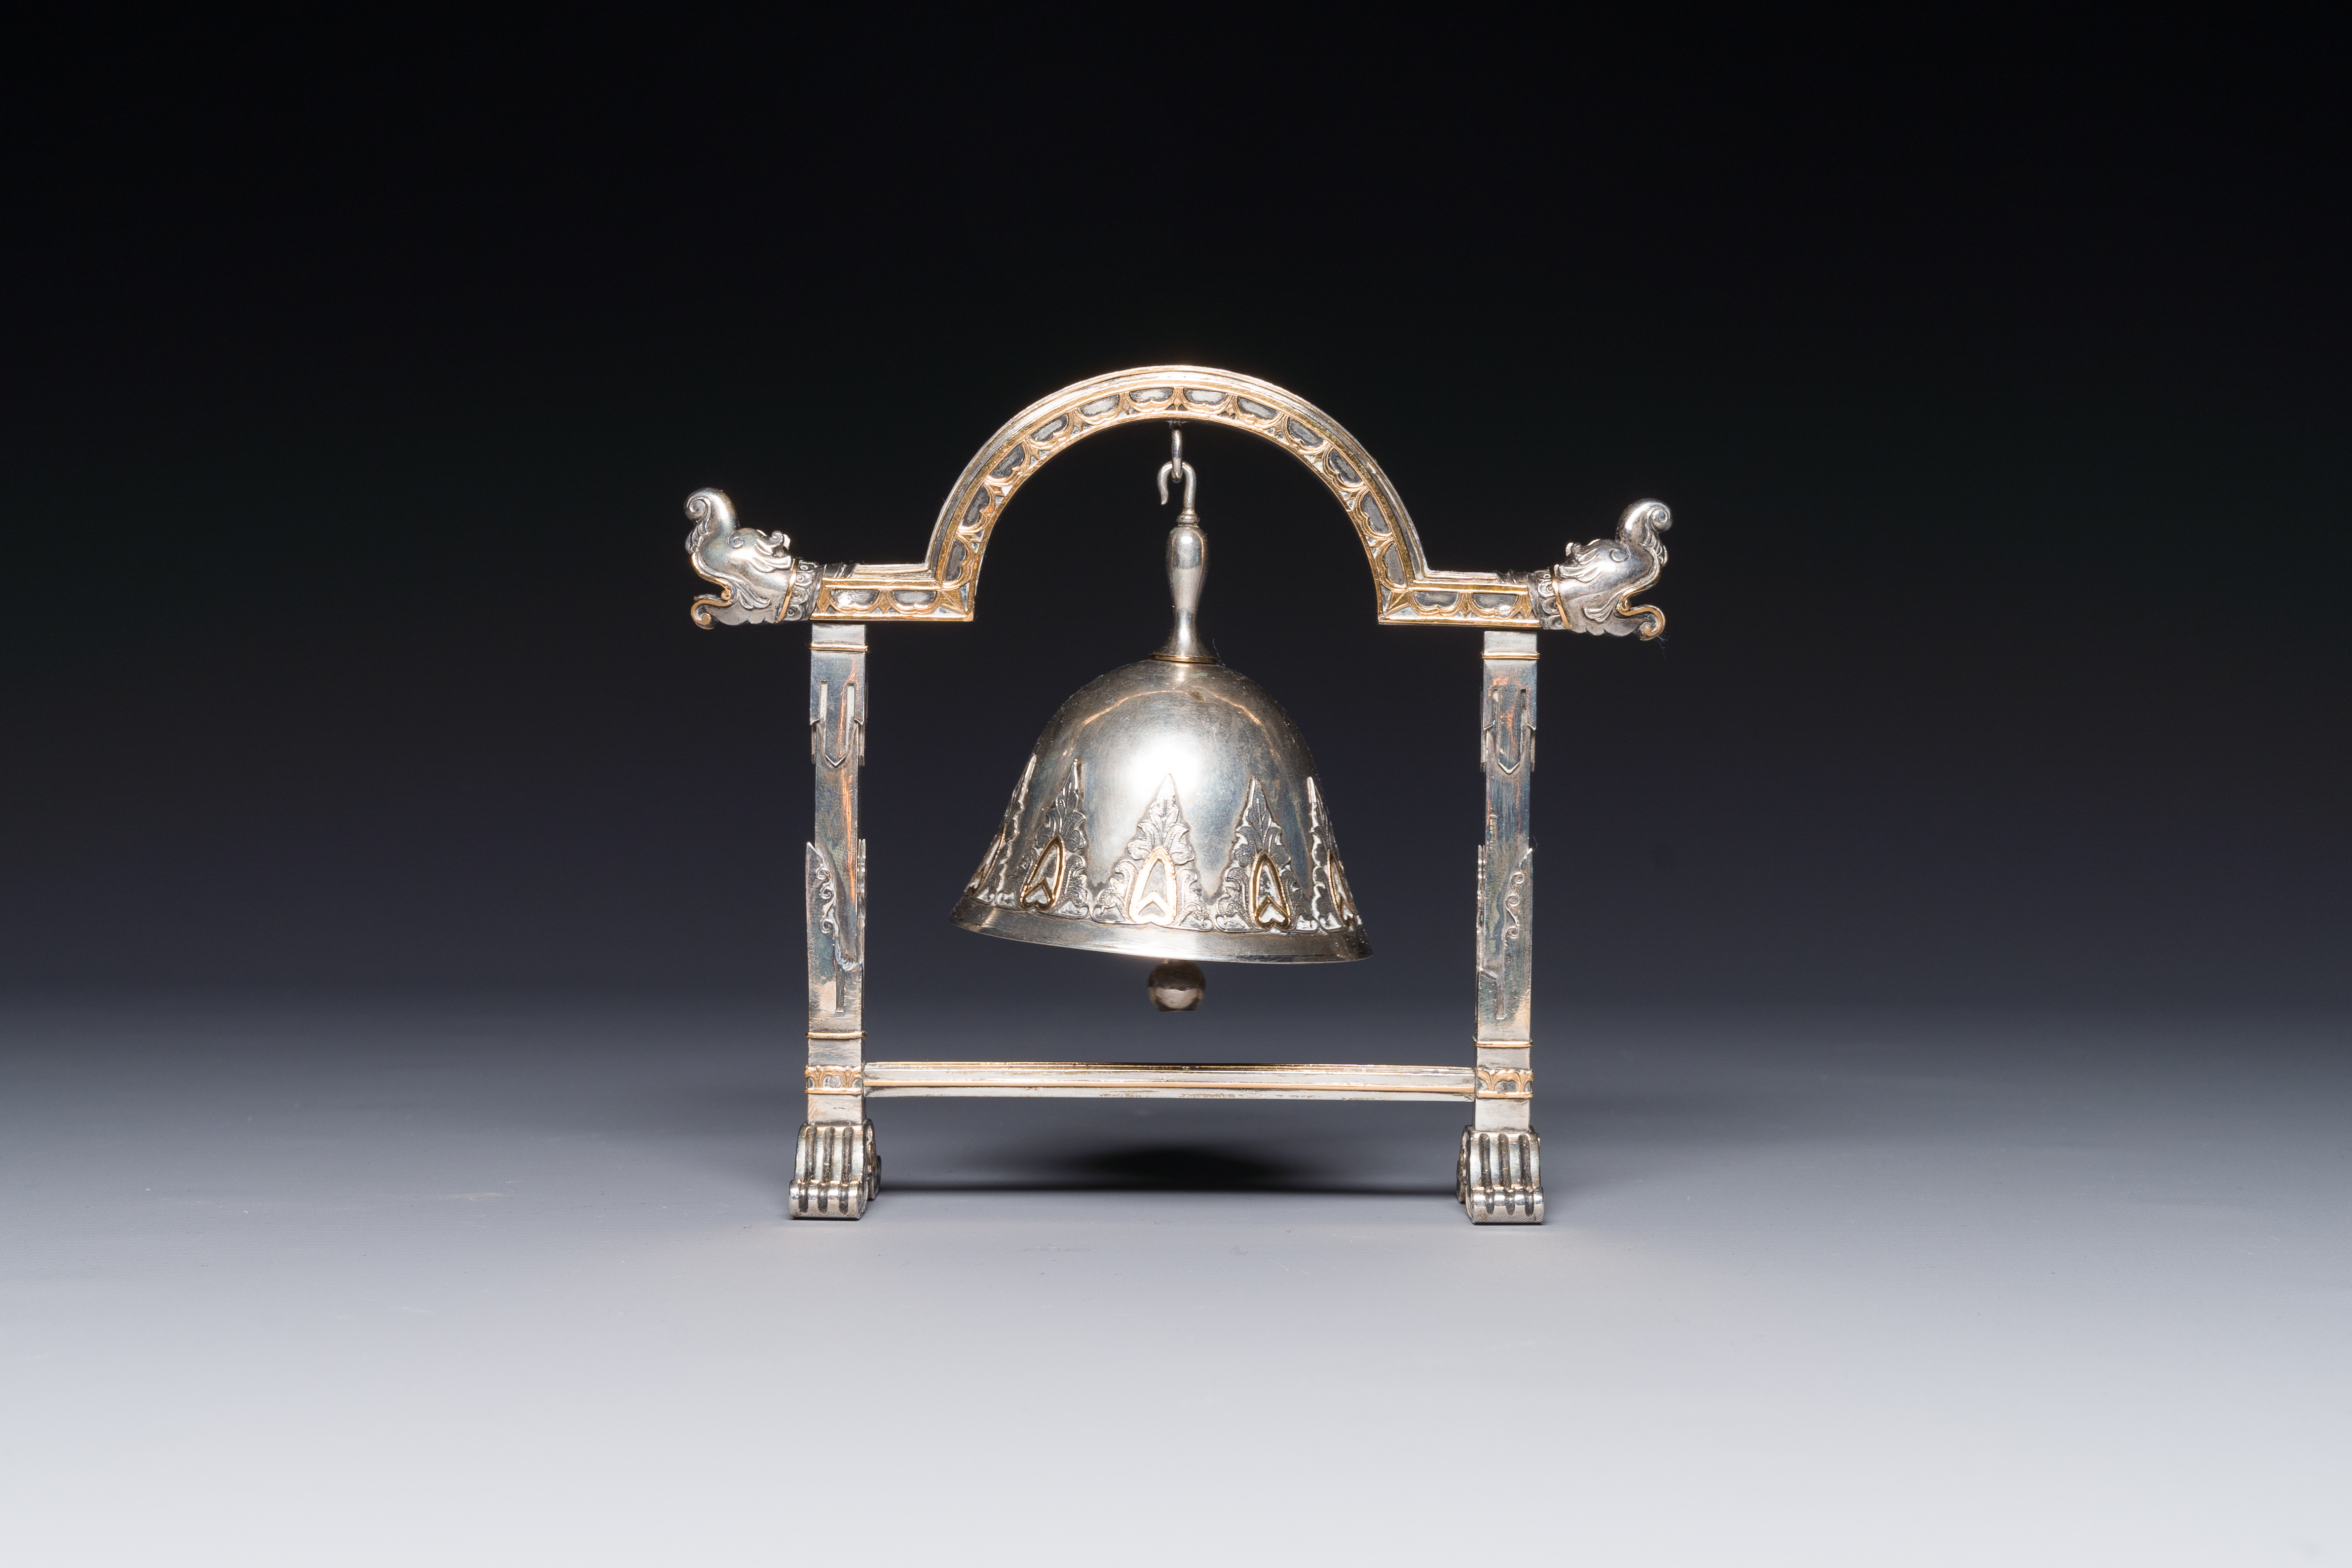 A fine parcel-gilt silver table bell or miniature gong, Southeast Asia, early 20th C. - Image 9 of 12